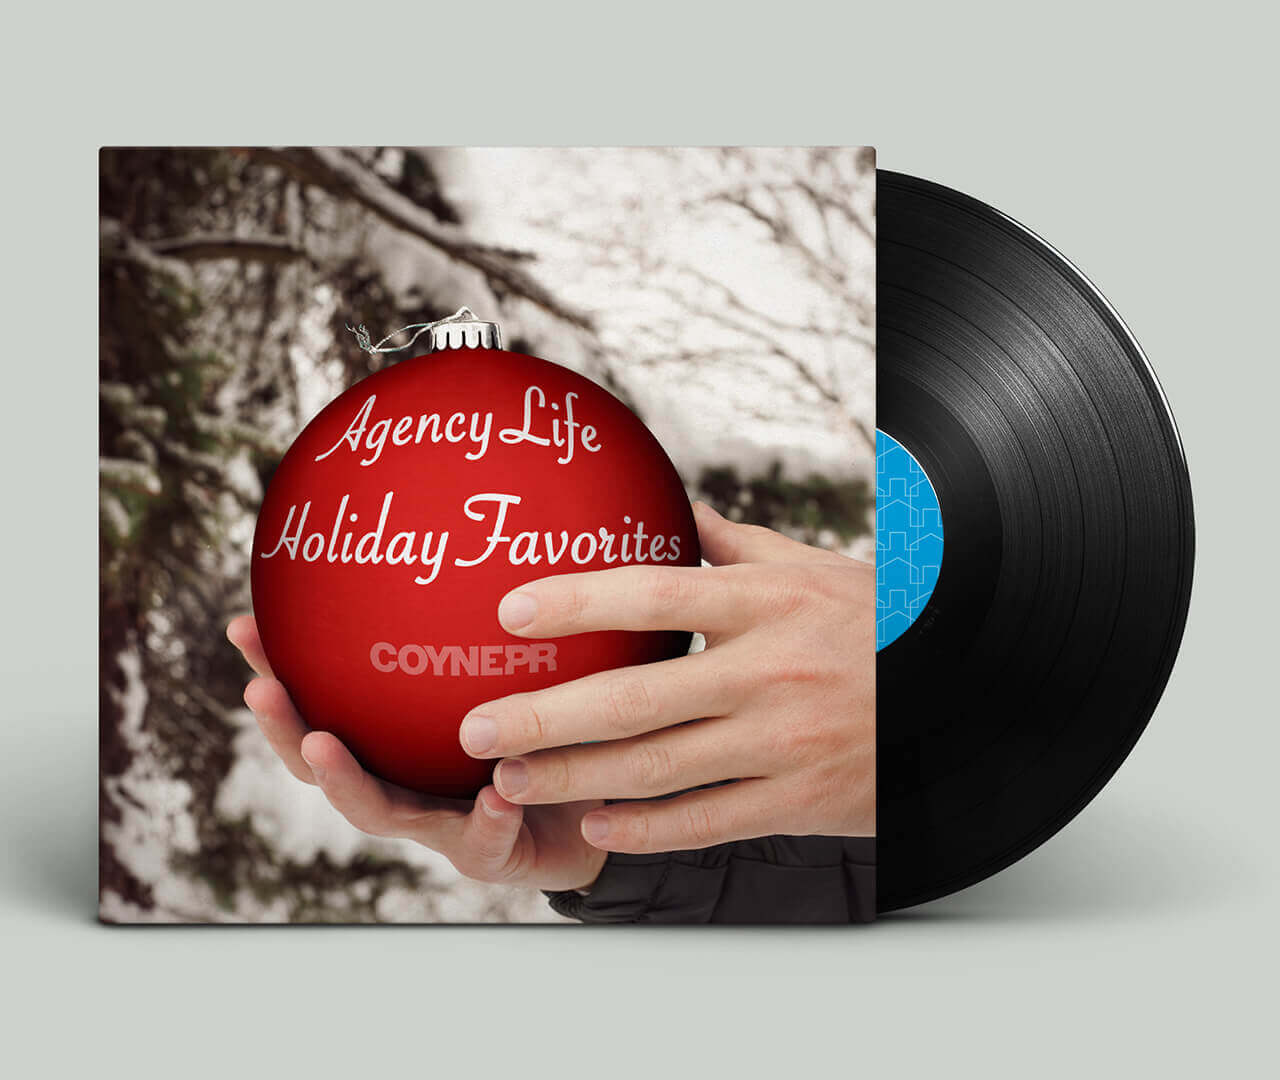 Agency Life Holiday Favorites